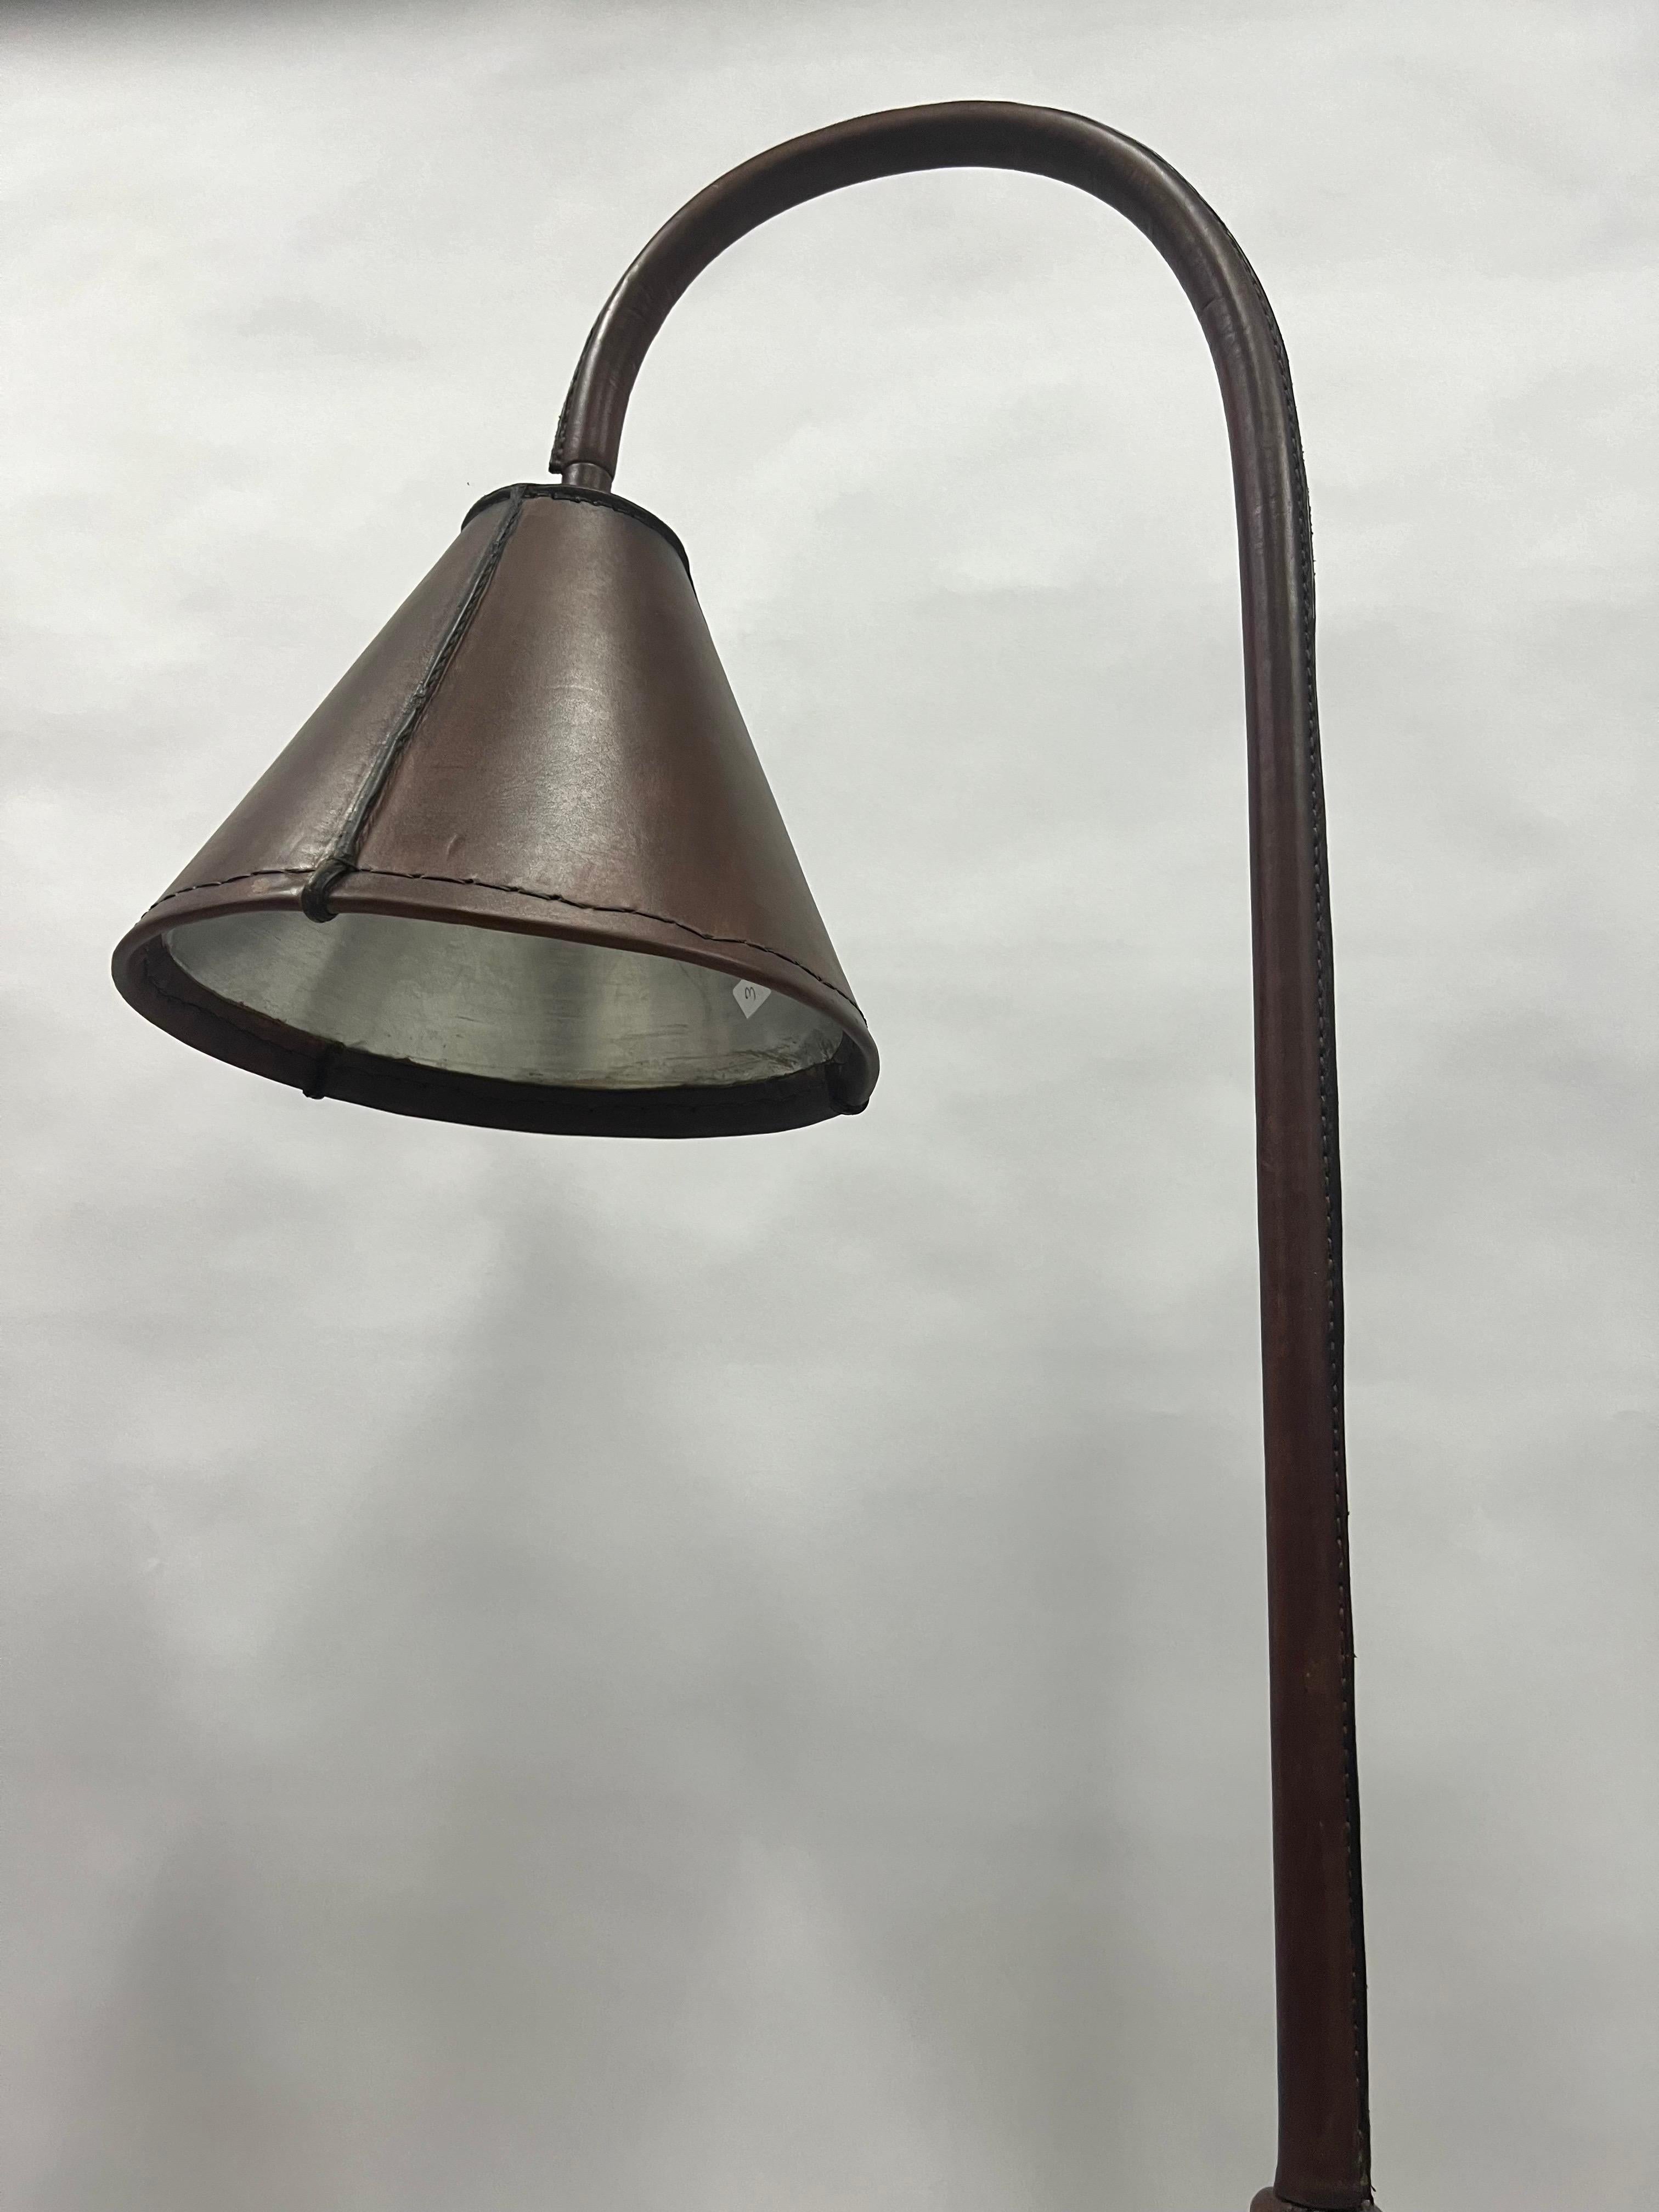 Pair of French Mid-Century Hand-Stitched Leather Floor Lamps by Jacques Adnet For Sale 2